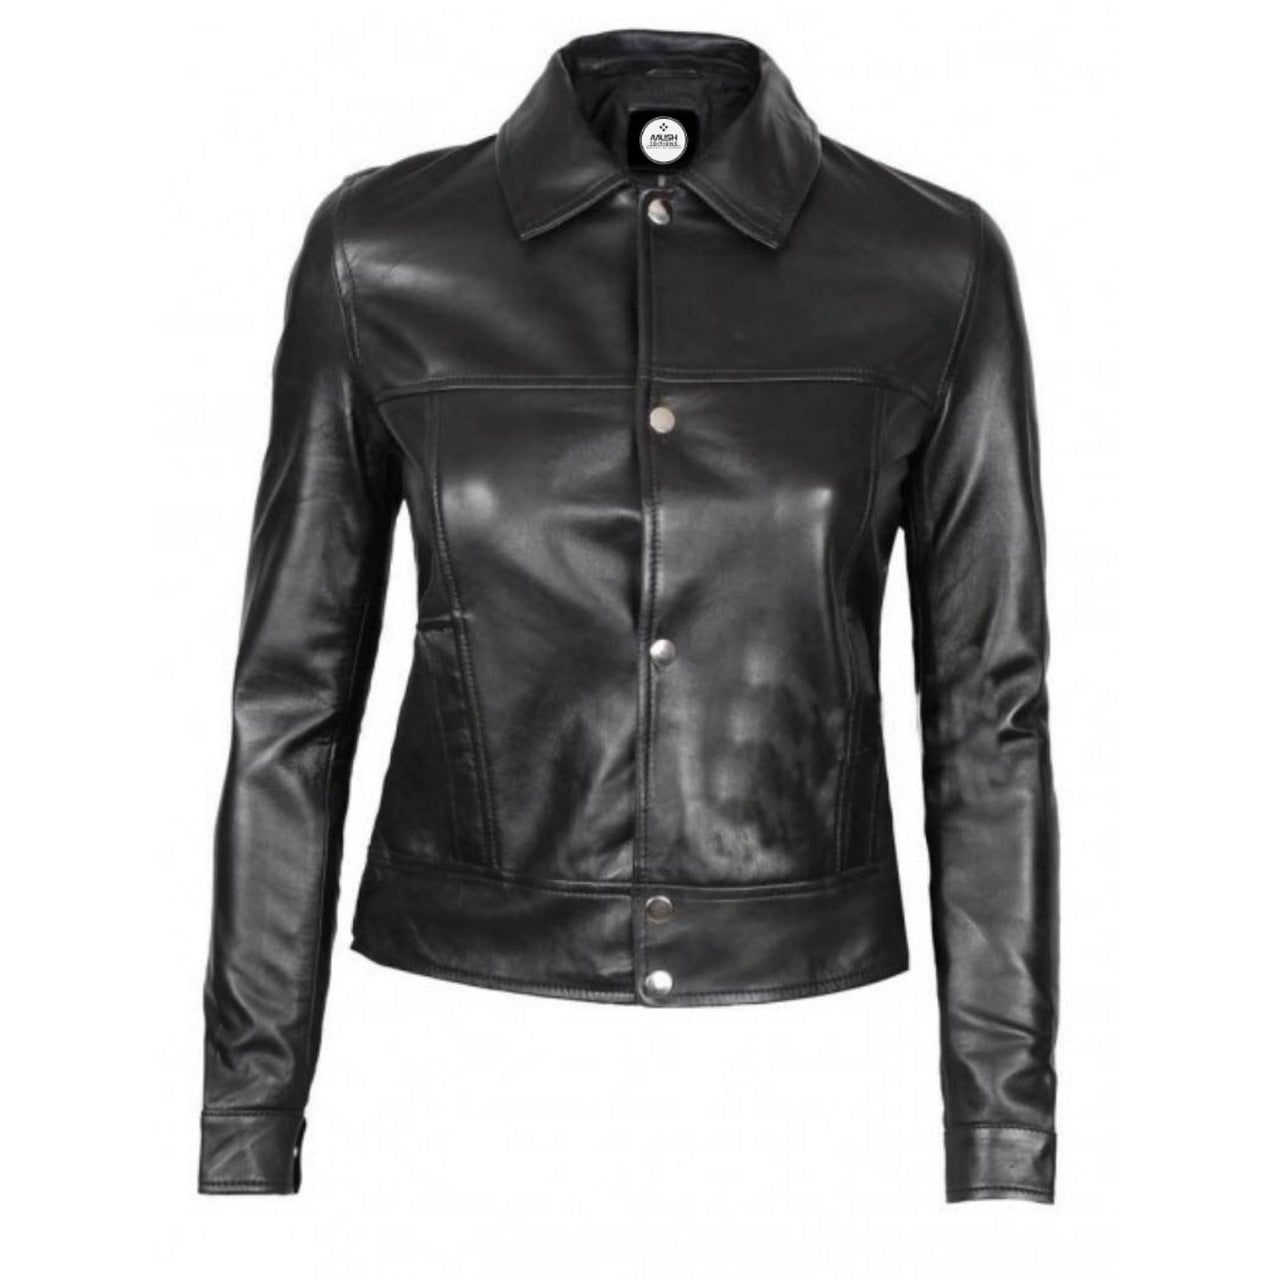 Black Button Up Casual Leather Jacket For Women - Leather Jacket